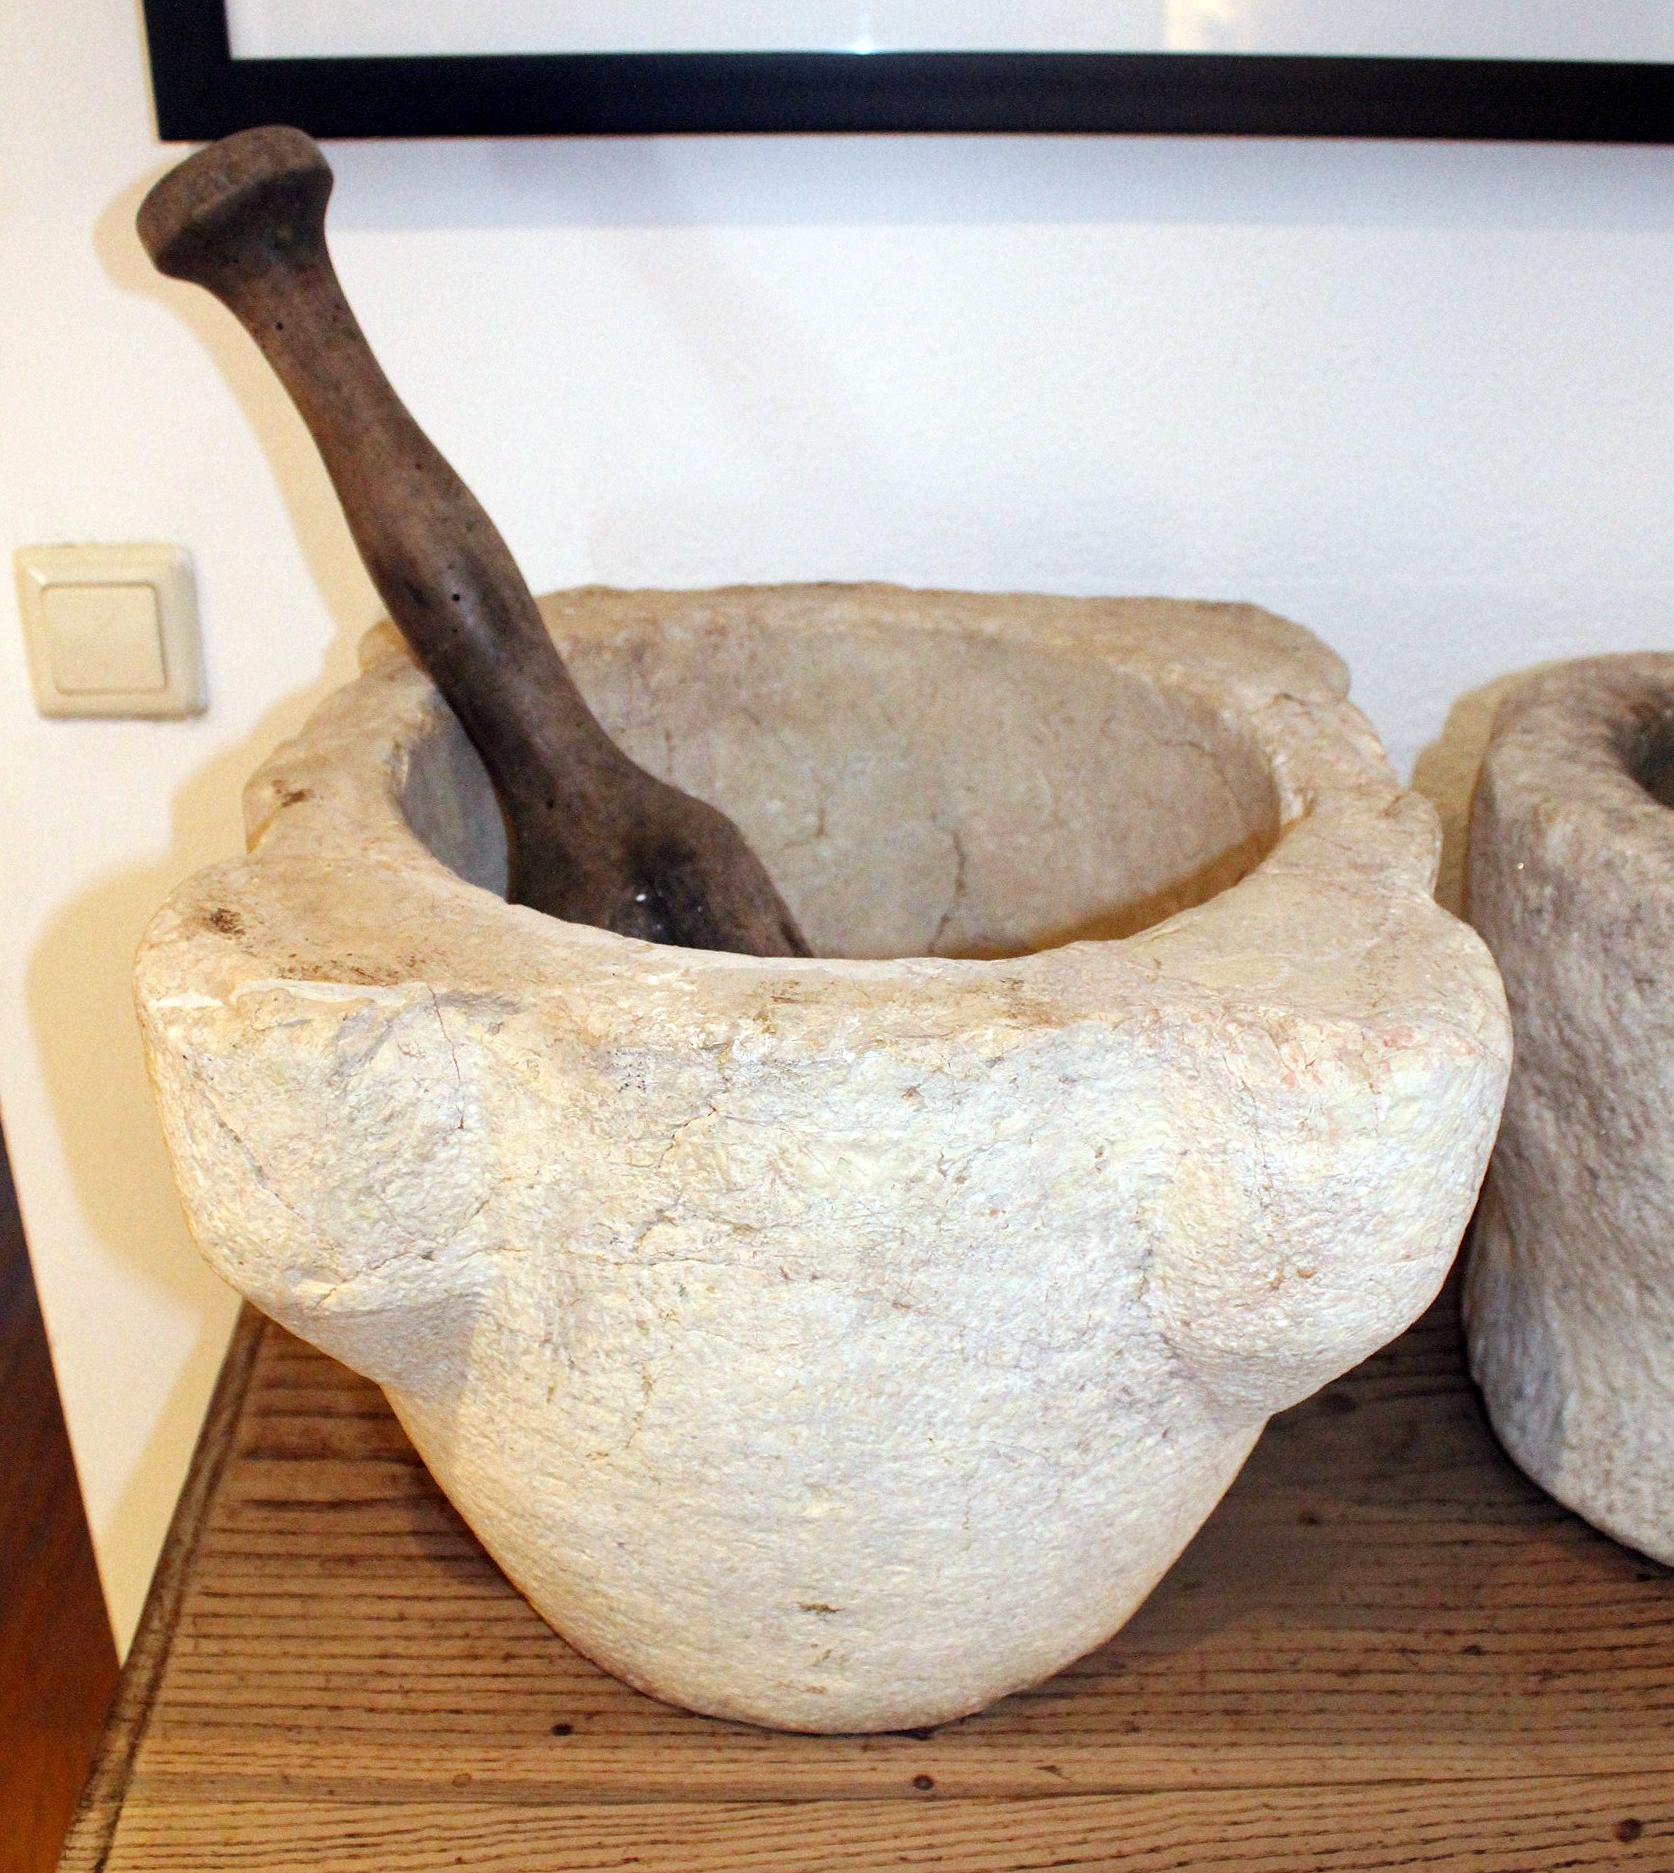 18th century Spanish hand carved stone kitchen mortar and wooden pestle, used in kitchens and pharmacies to prepare herbs for cooking or healing.
 